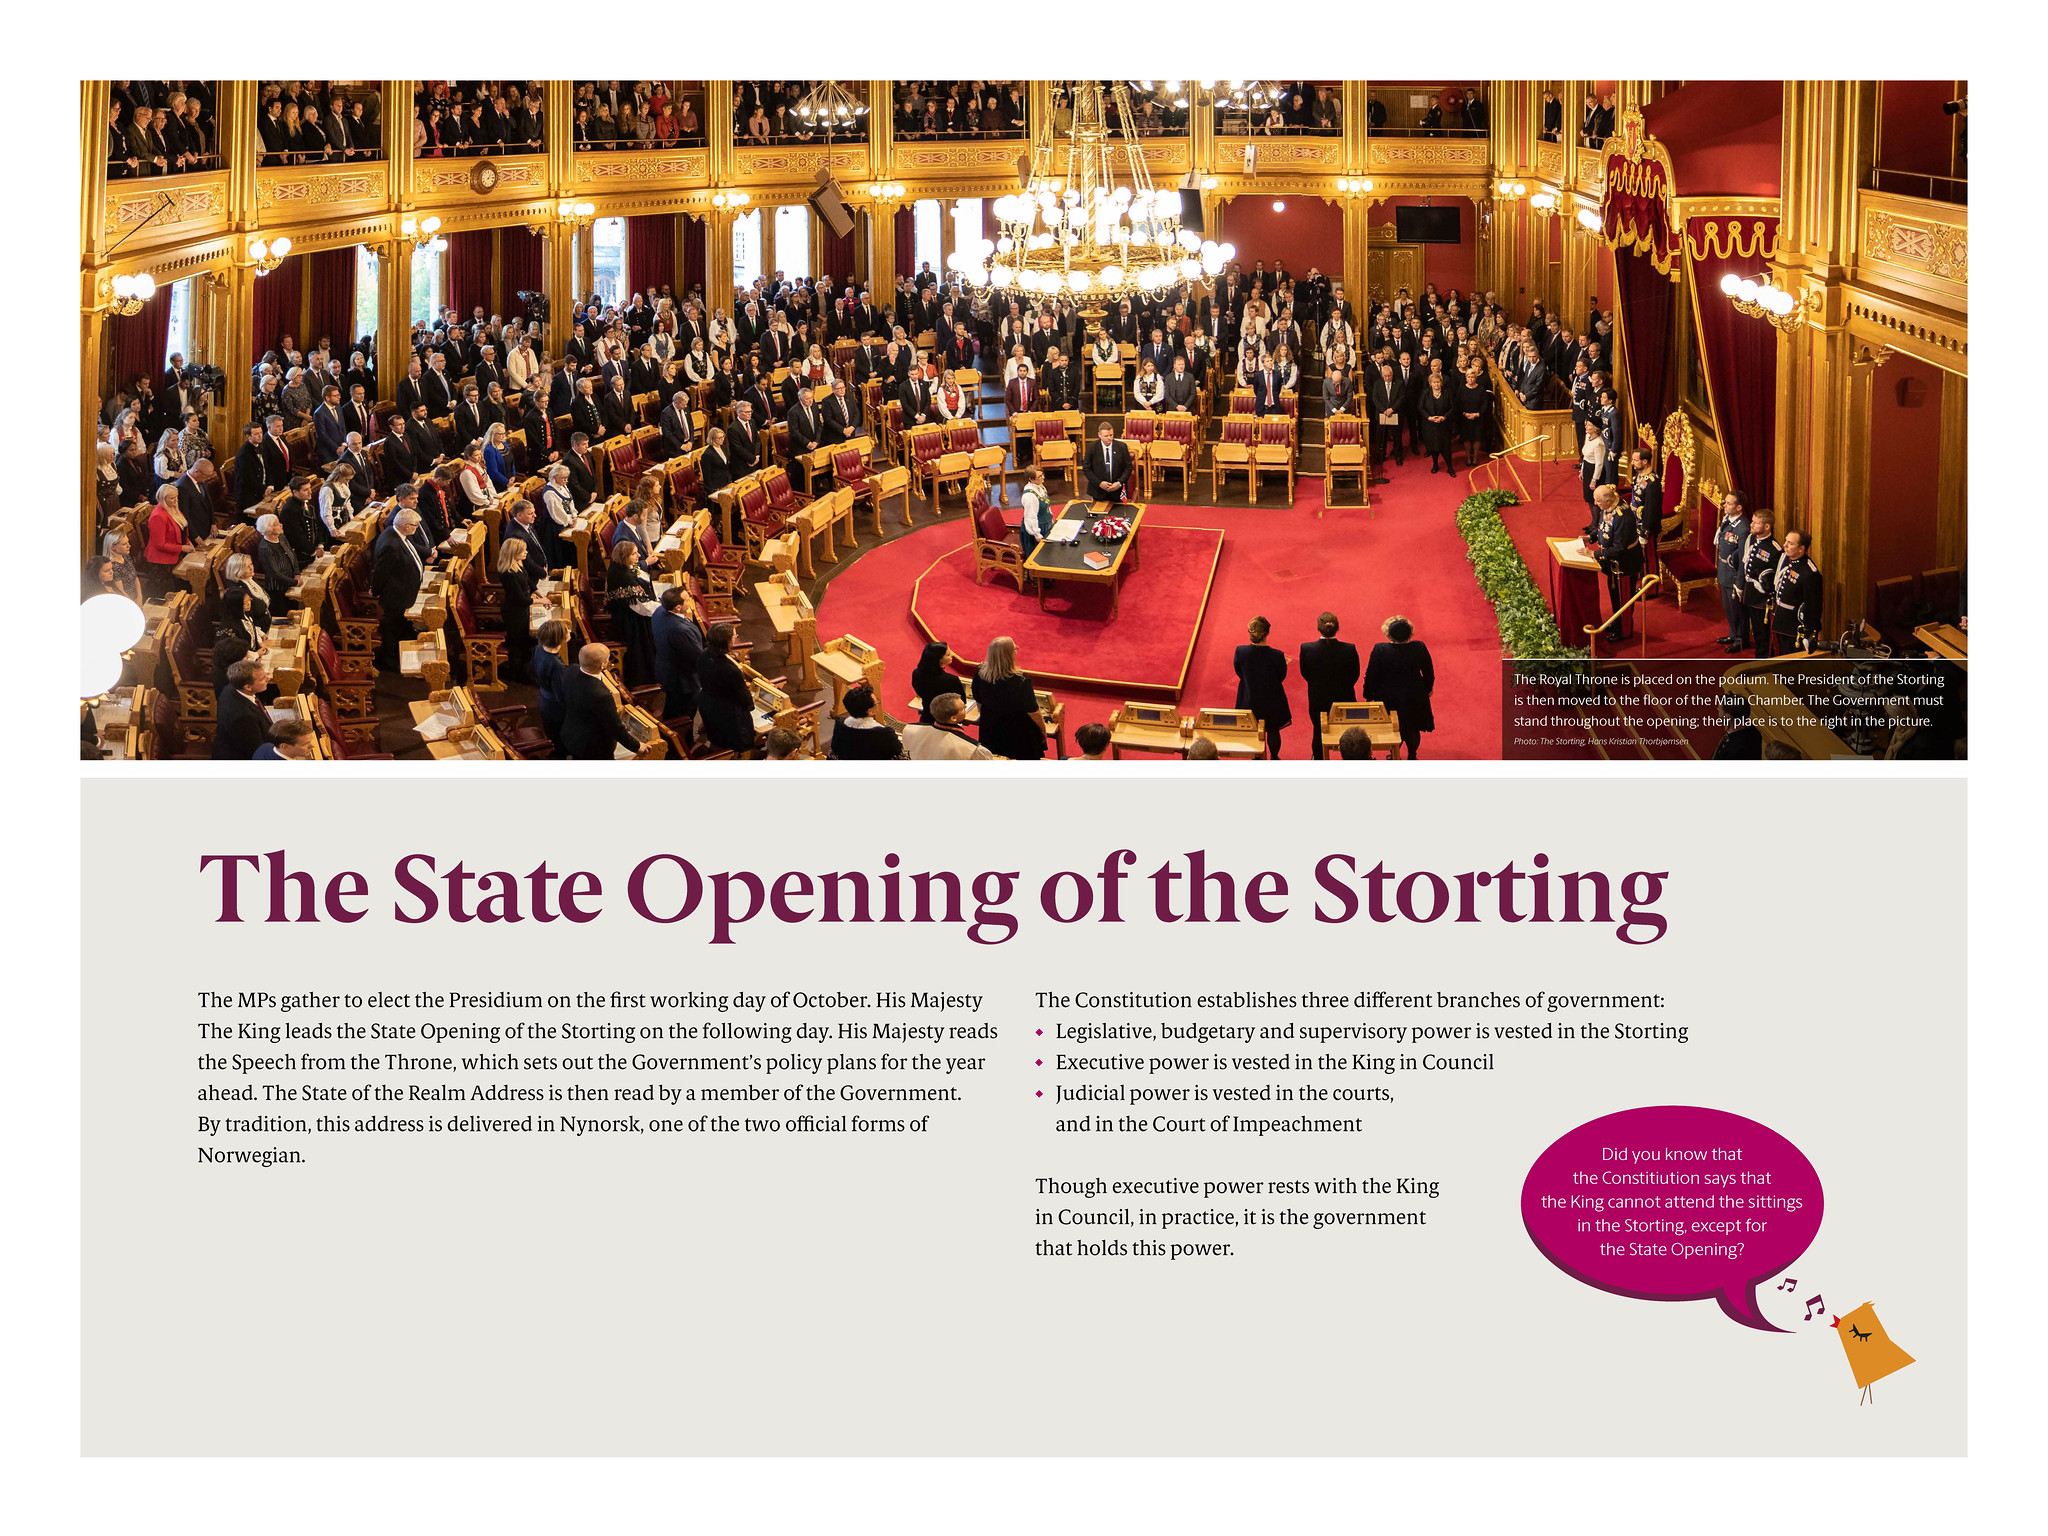 The State opening of the Storting, poster. See text below